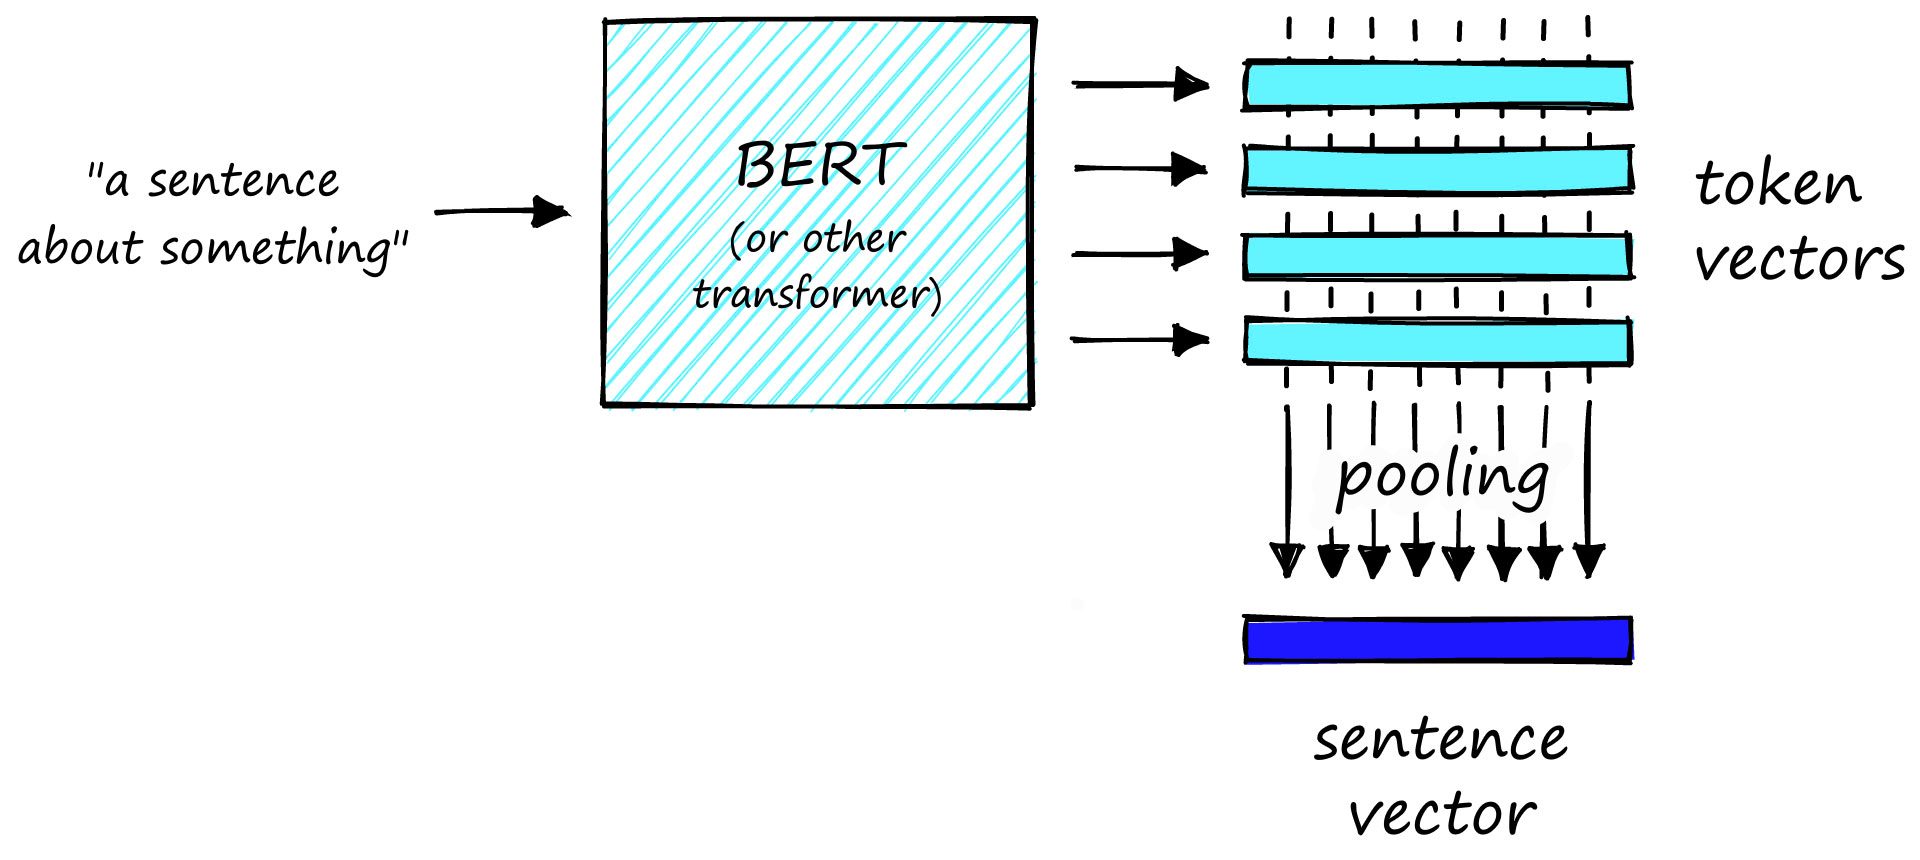 Transformation of the many token vectors output by a transformer model into a single sentence vector.